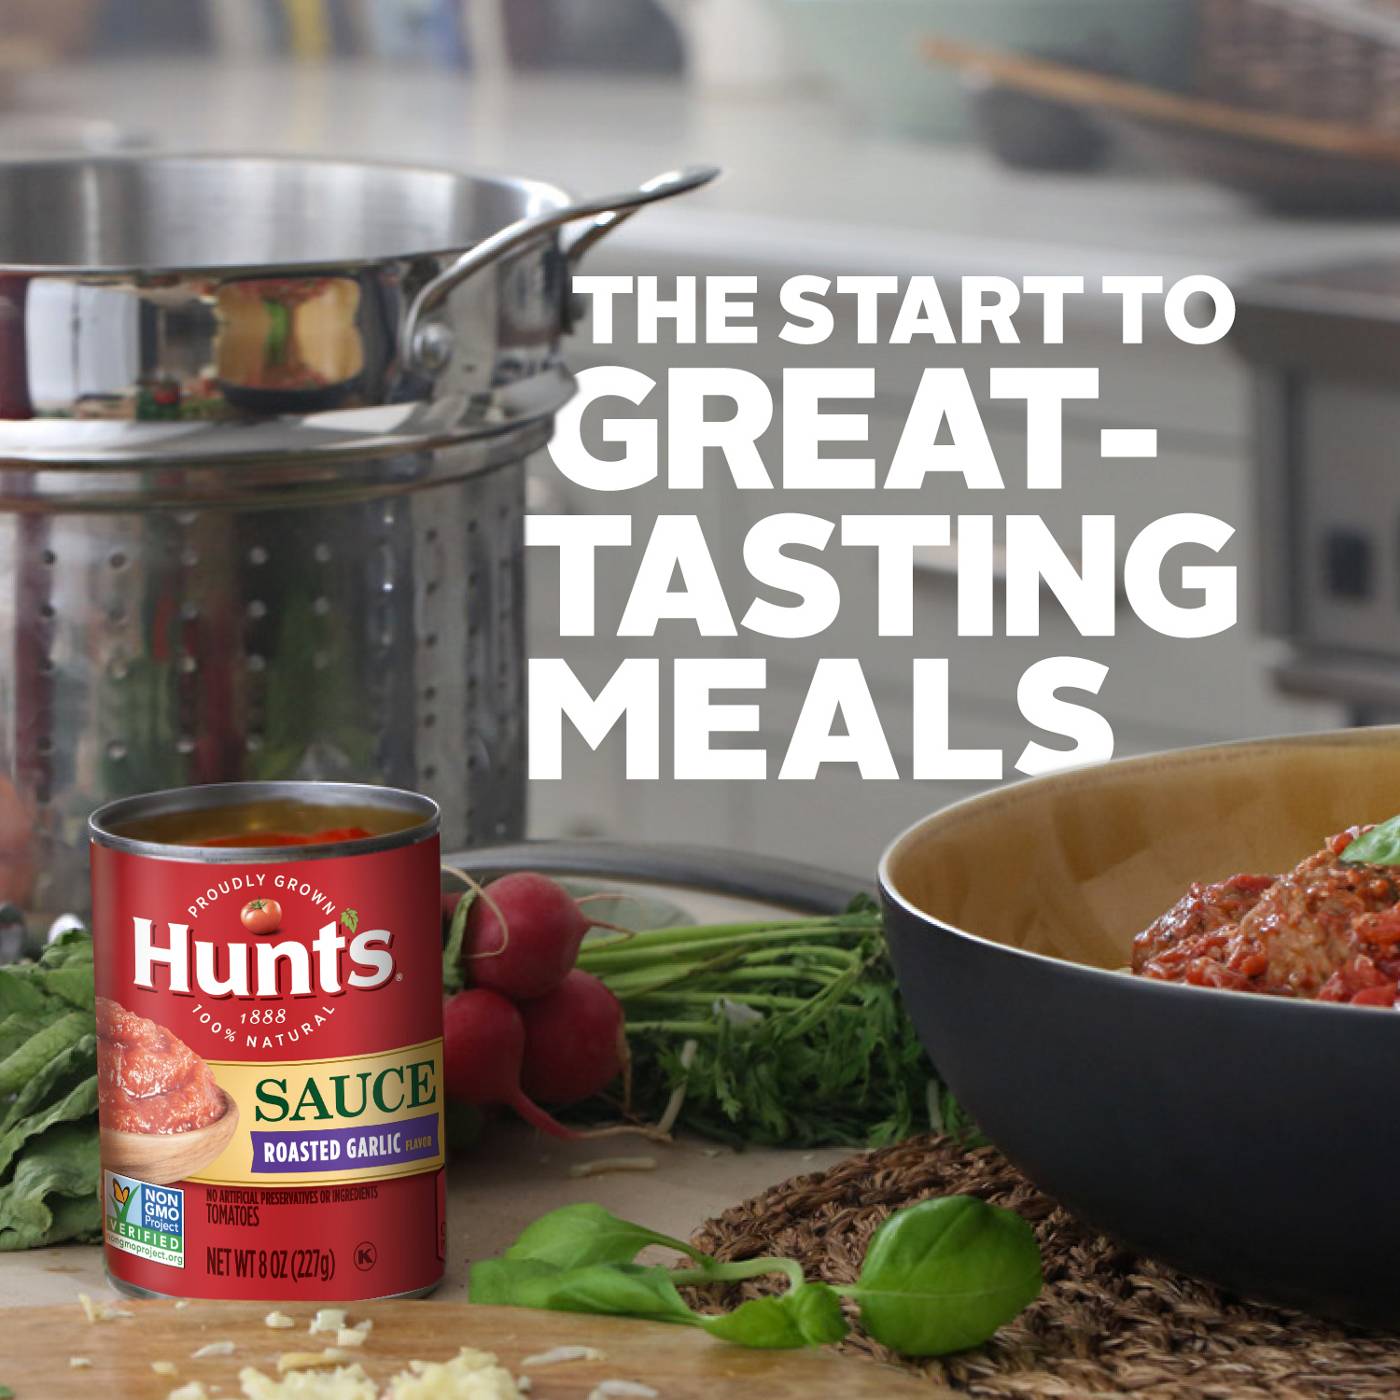 Hunt's Tomato Sauce with Roasted Garlic; image 5 of 7